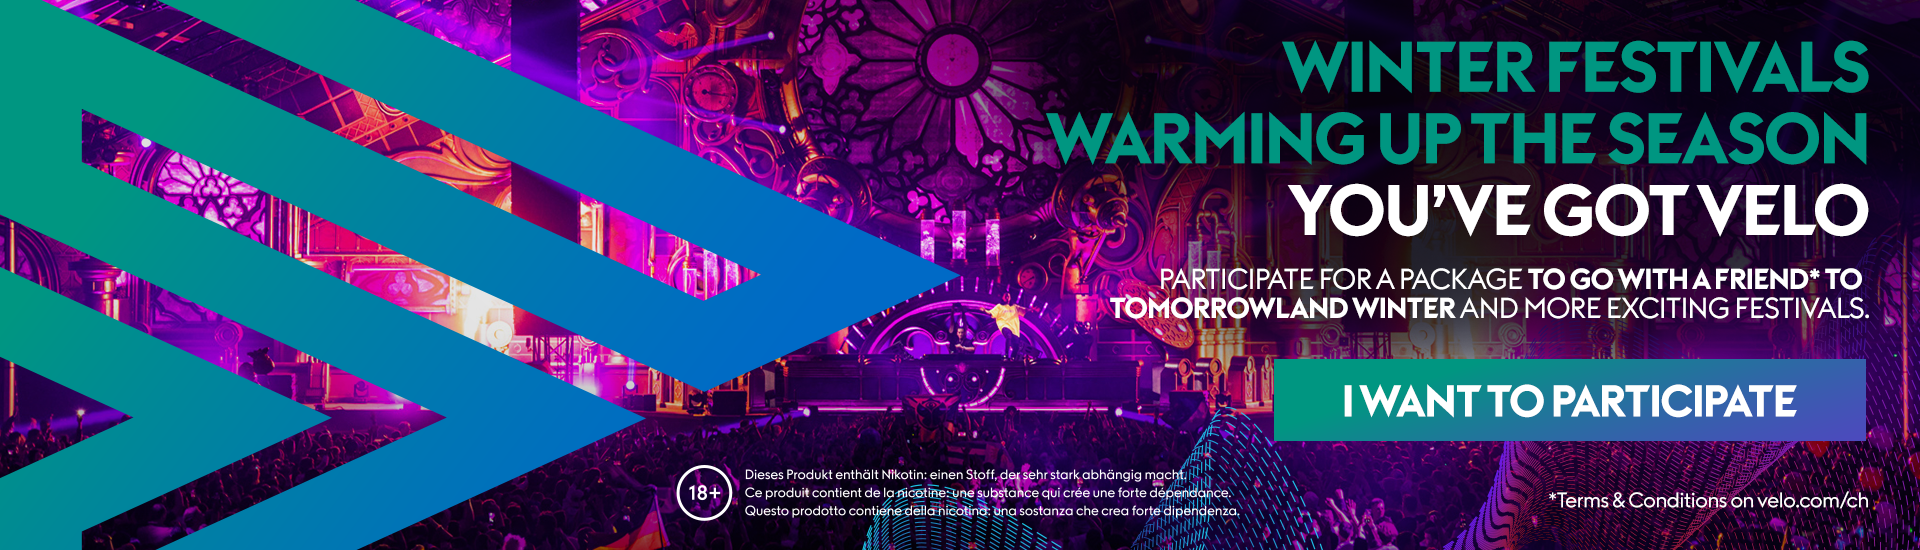 Winter Festivals - Warming up the season. Enter the competition to win tickets 